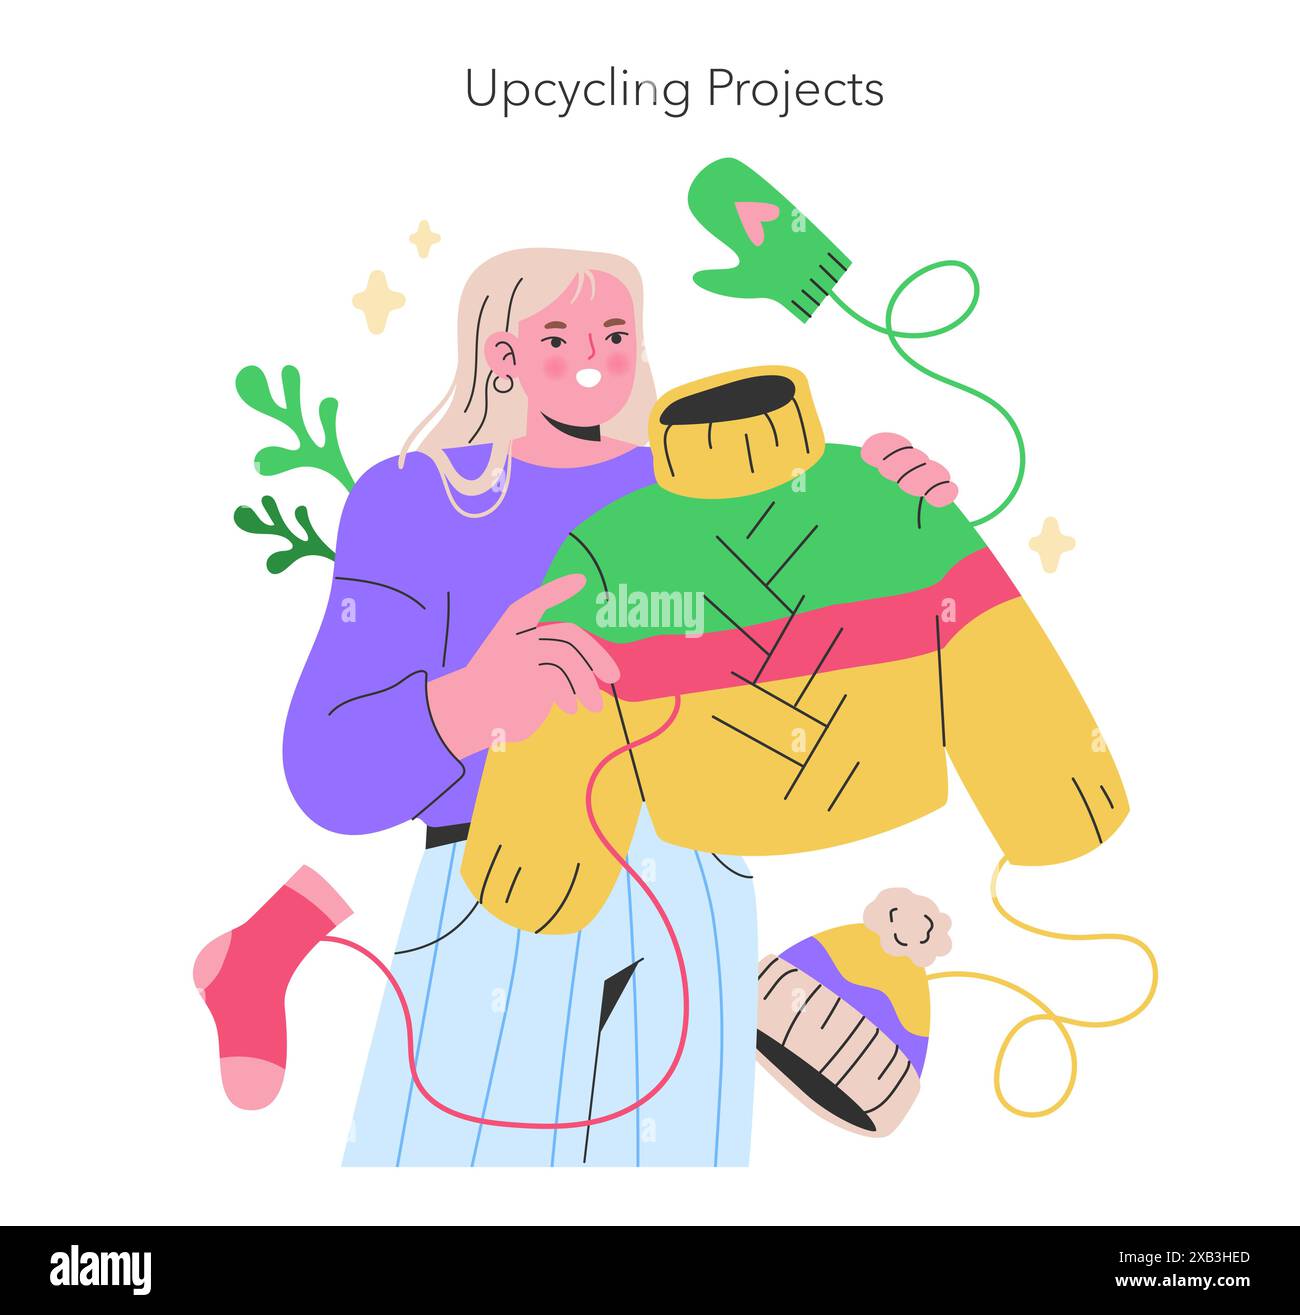 Maker Culture concept A bright figure breathes new life into old garments, illustrating the magic of upcycling projects with a joyful color palette Vector illustration Stock Vector